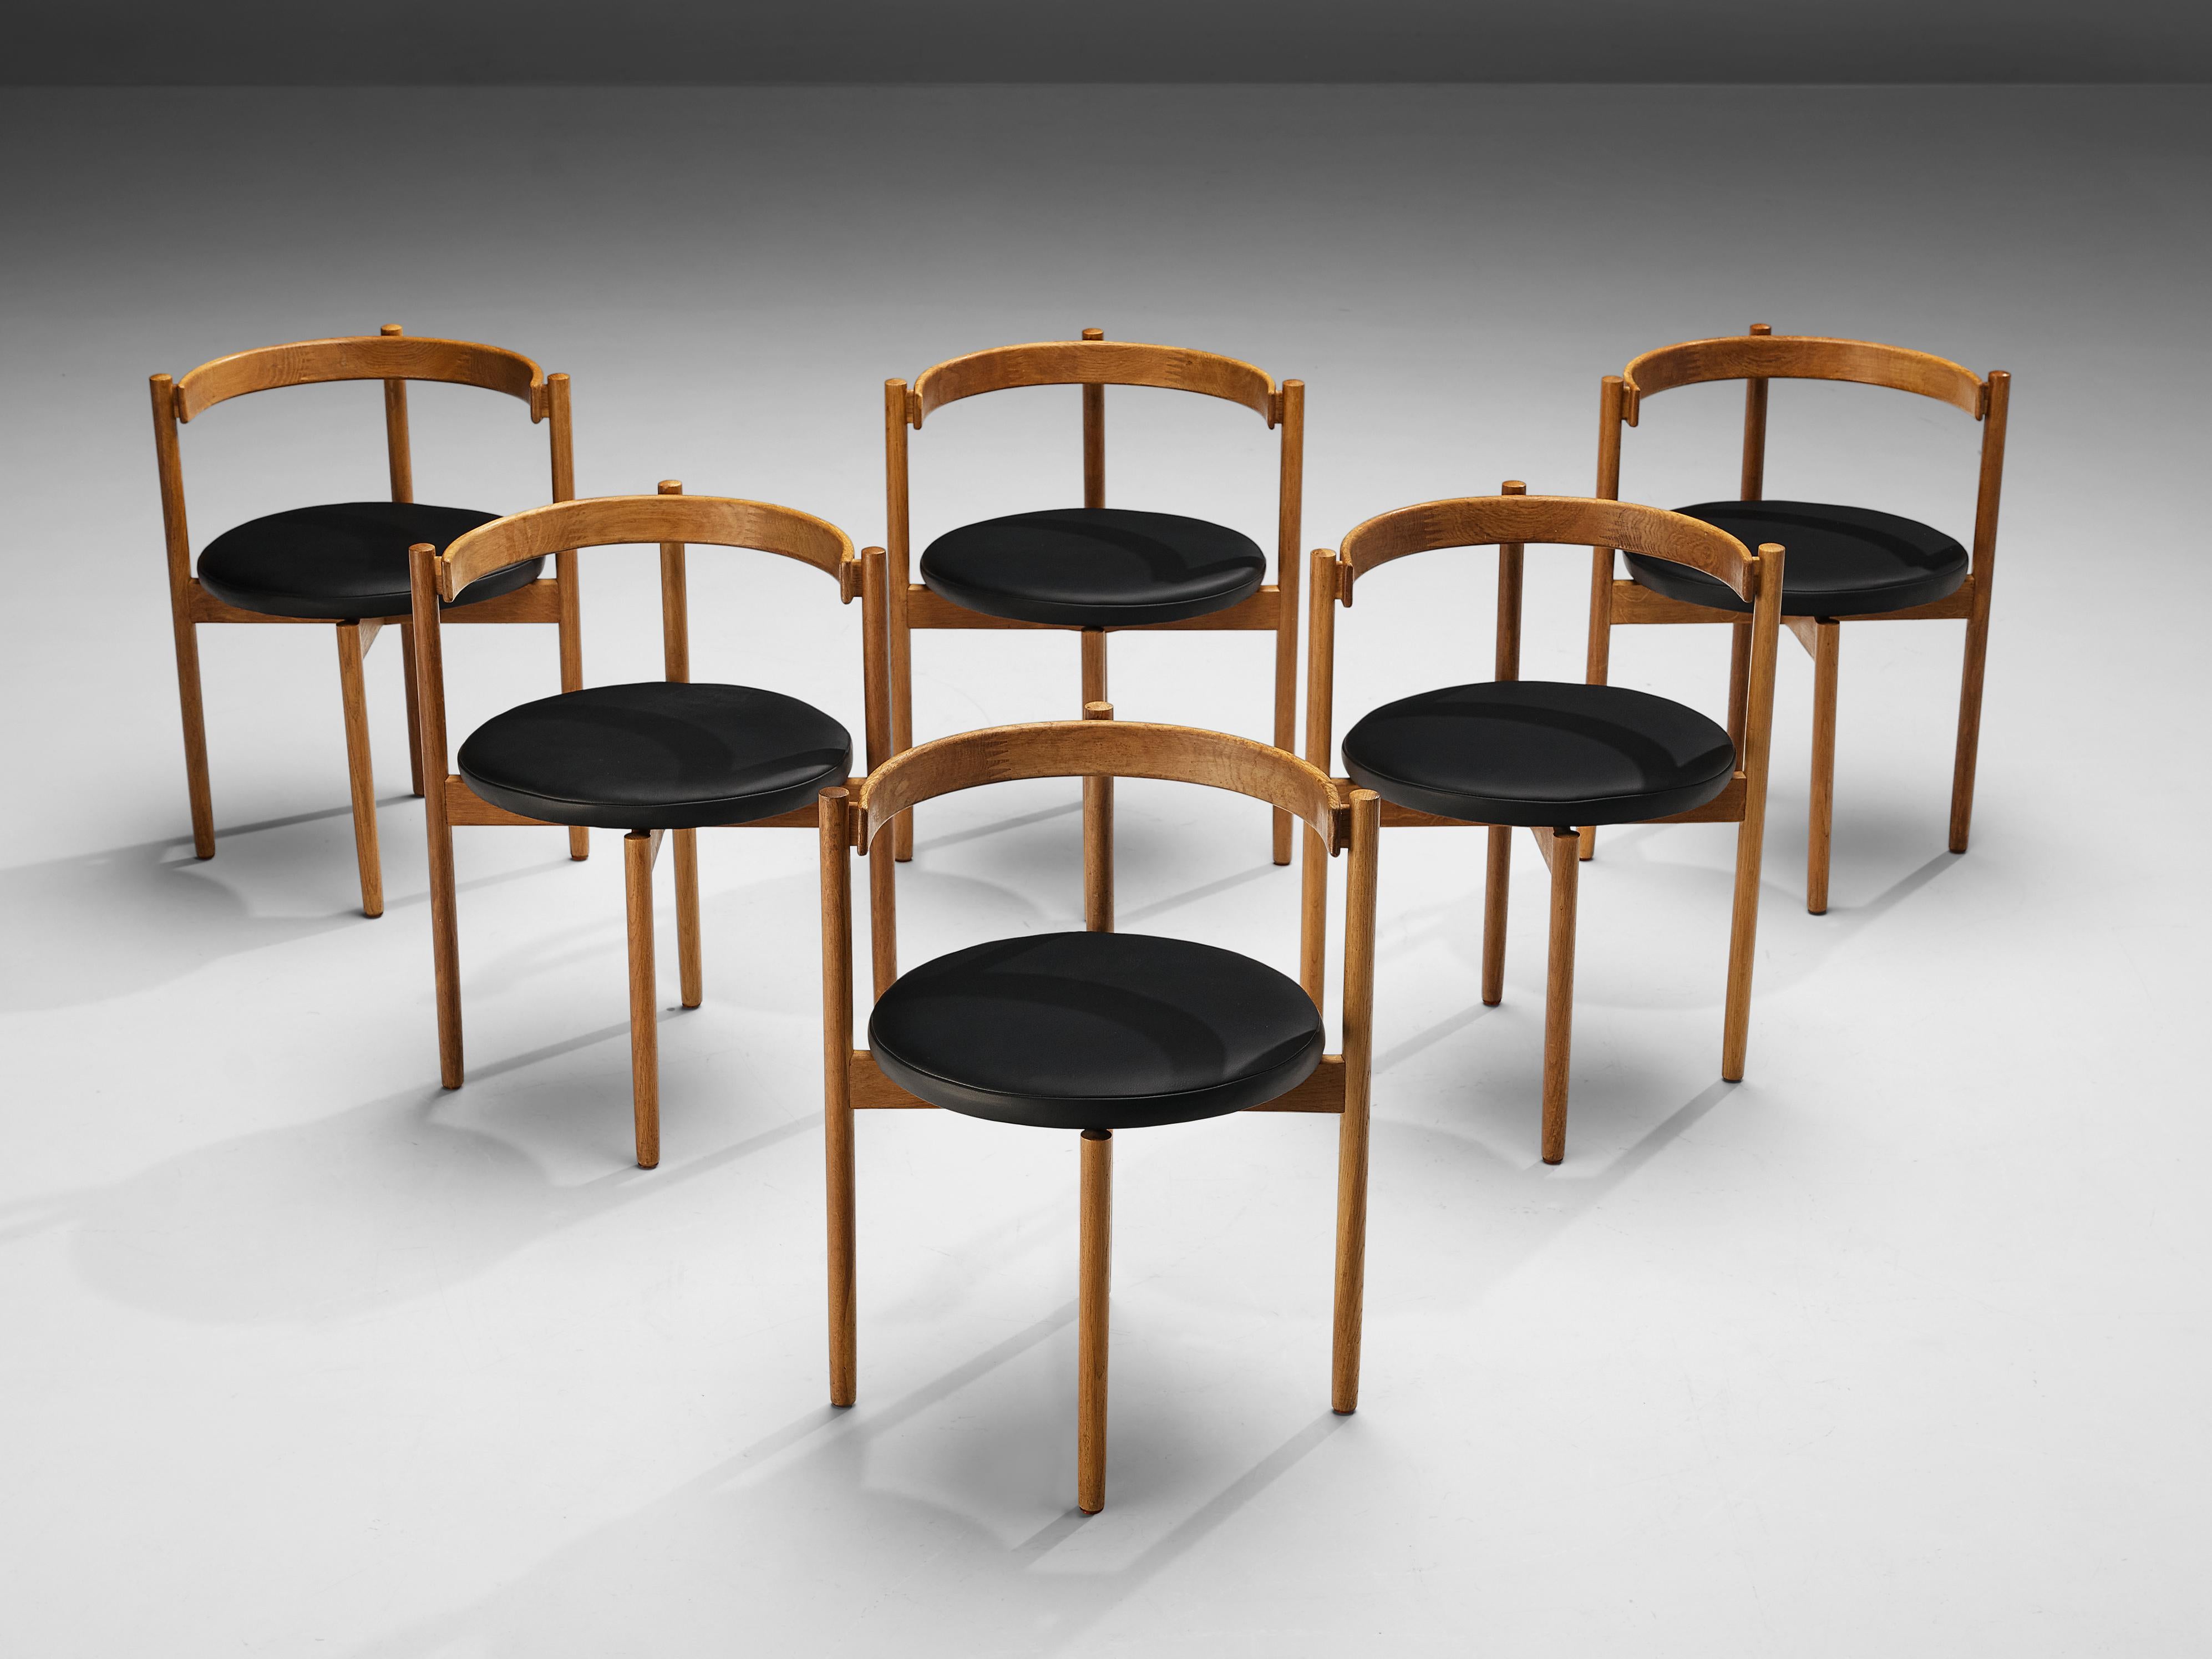 Hugo Frandsen for Børge Søndergaard, dining chairs, oak, leather, Denmark, 1960s

Set of six Danish dining chairs with leather upholstered seats. The round seat is resting on four tubular legs in oak. Three legs rise high to hold the curved